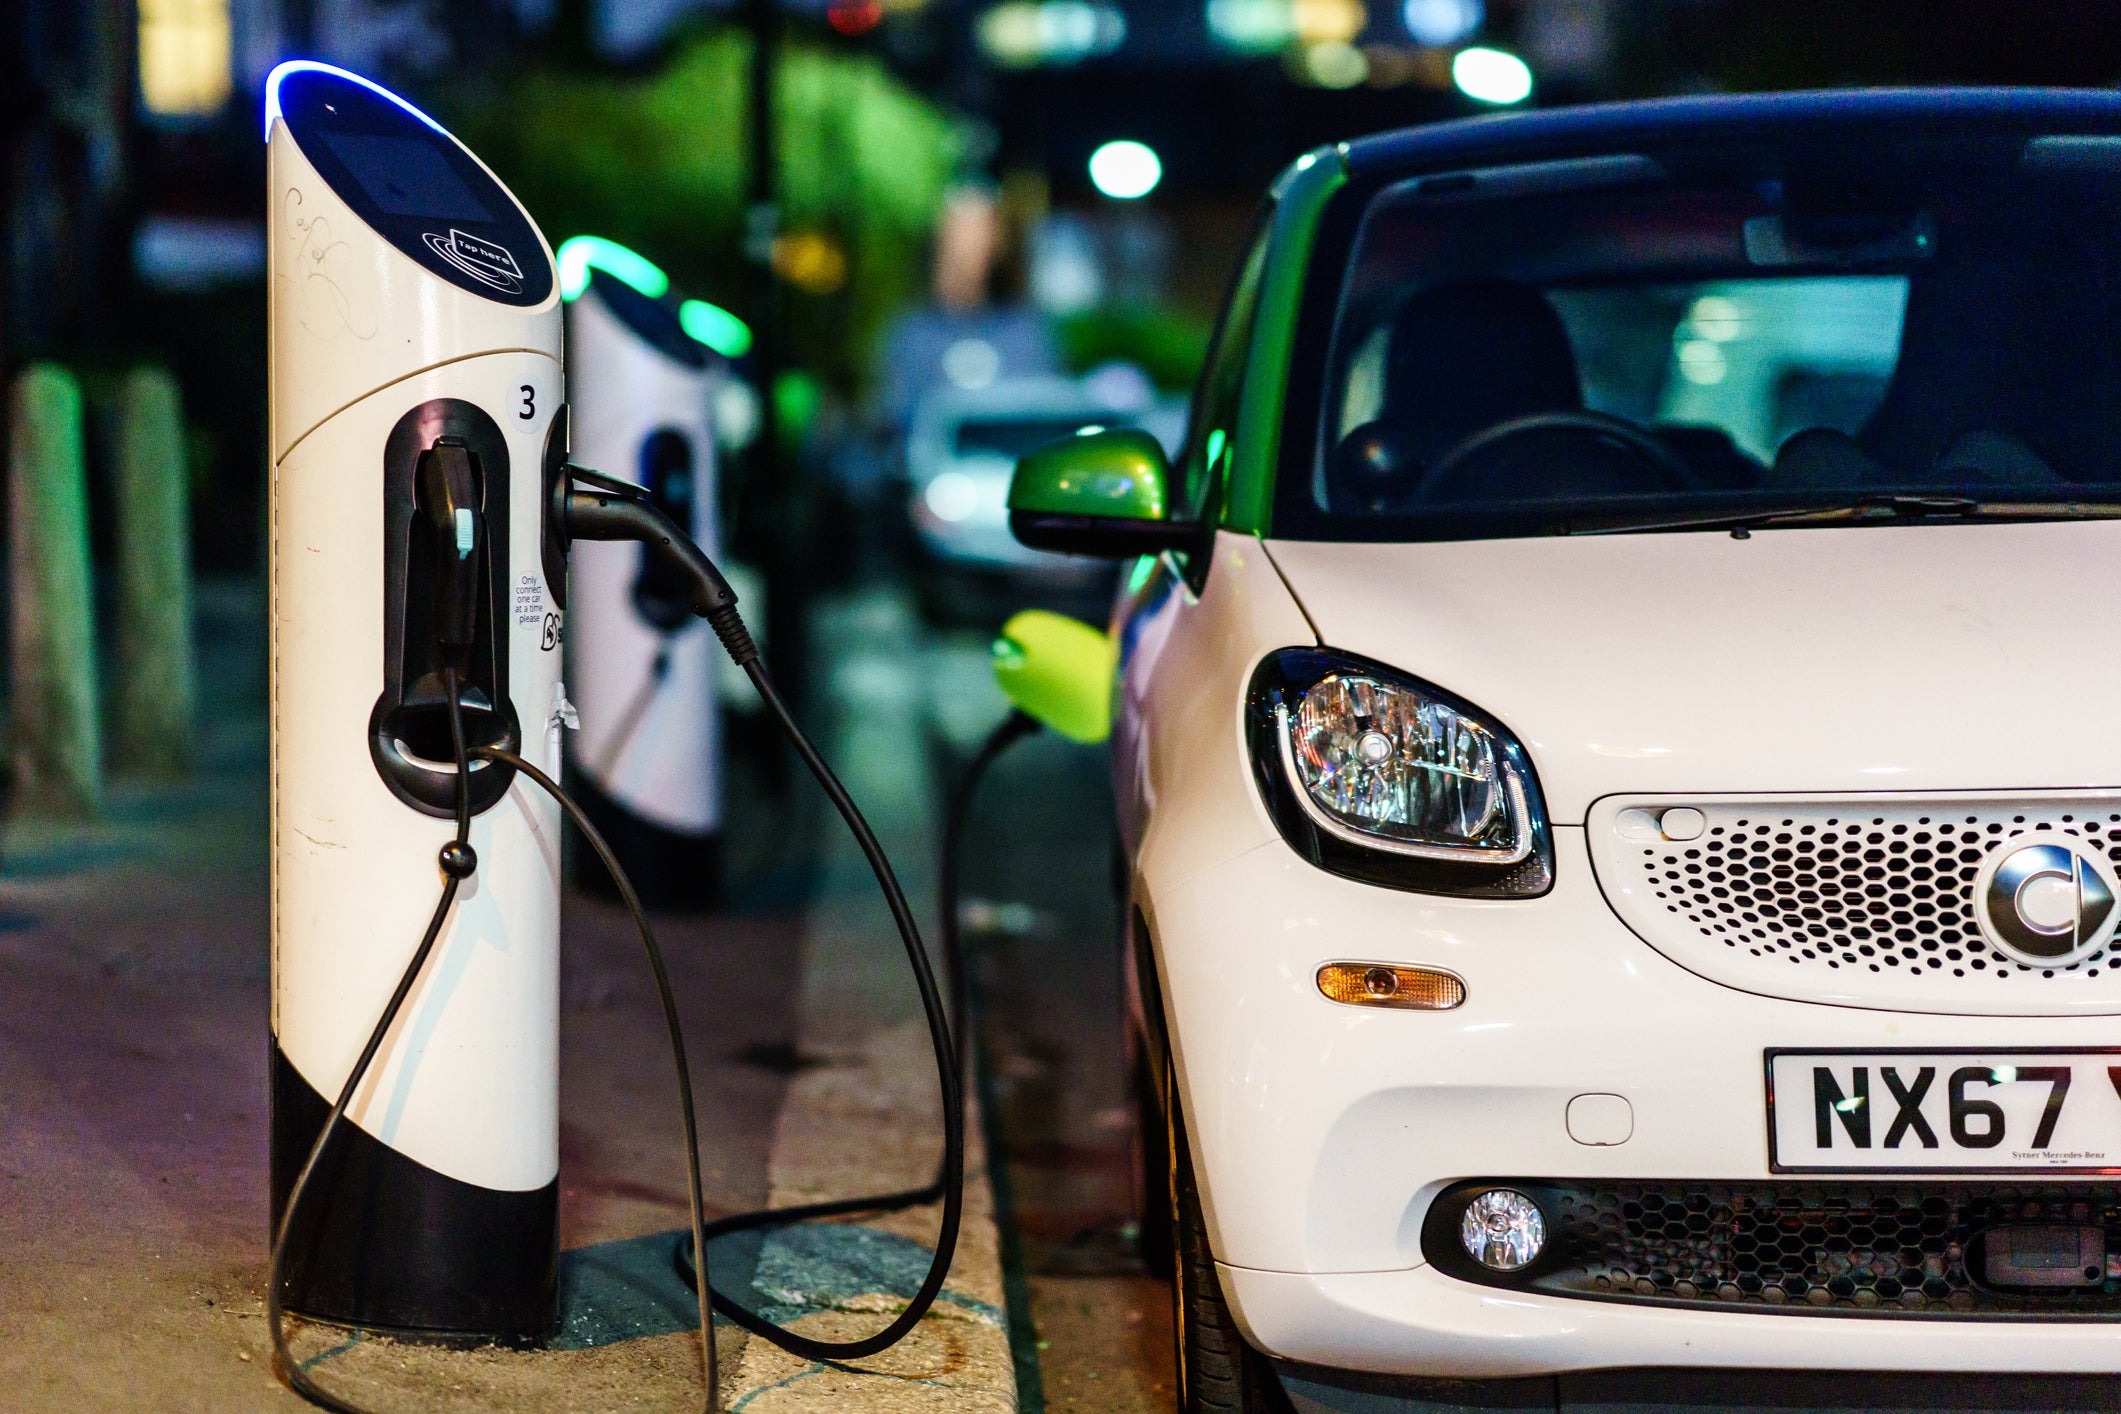 The government has announced a ban on the sale of new petrol and diesel cars from 2030 as part of efforts to tackle the climate crisis